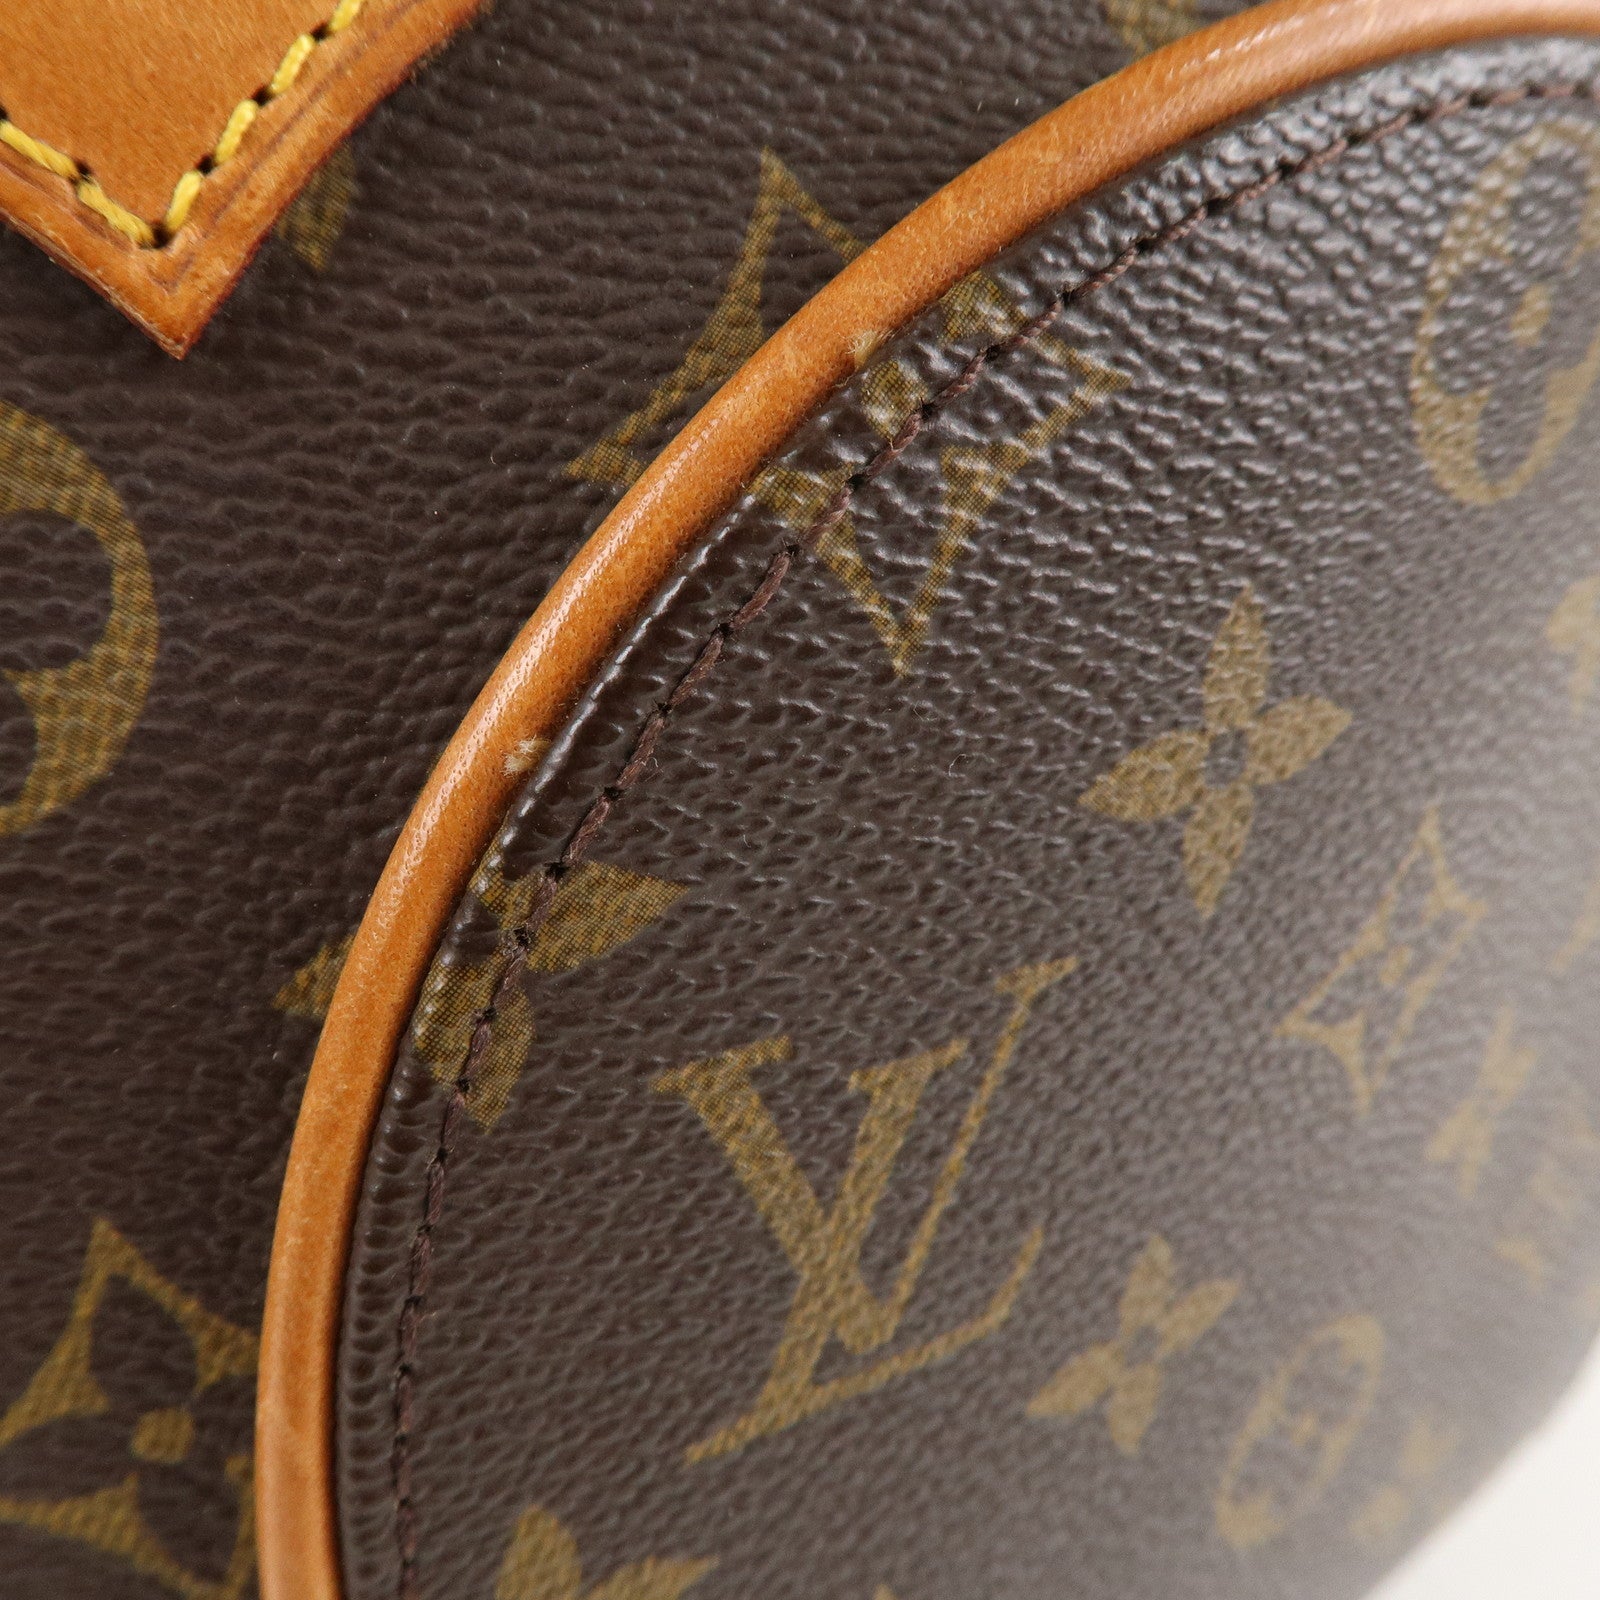 Louis Vuitton New Ellipse PM Full Review/LV Price Increase